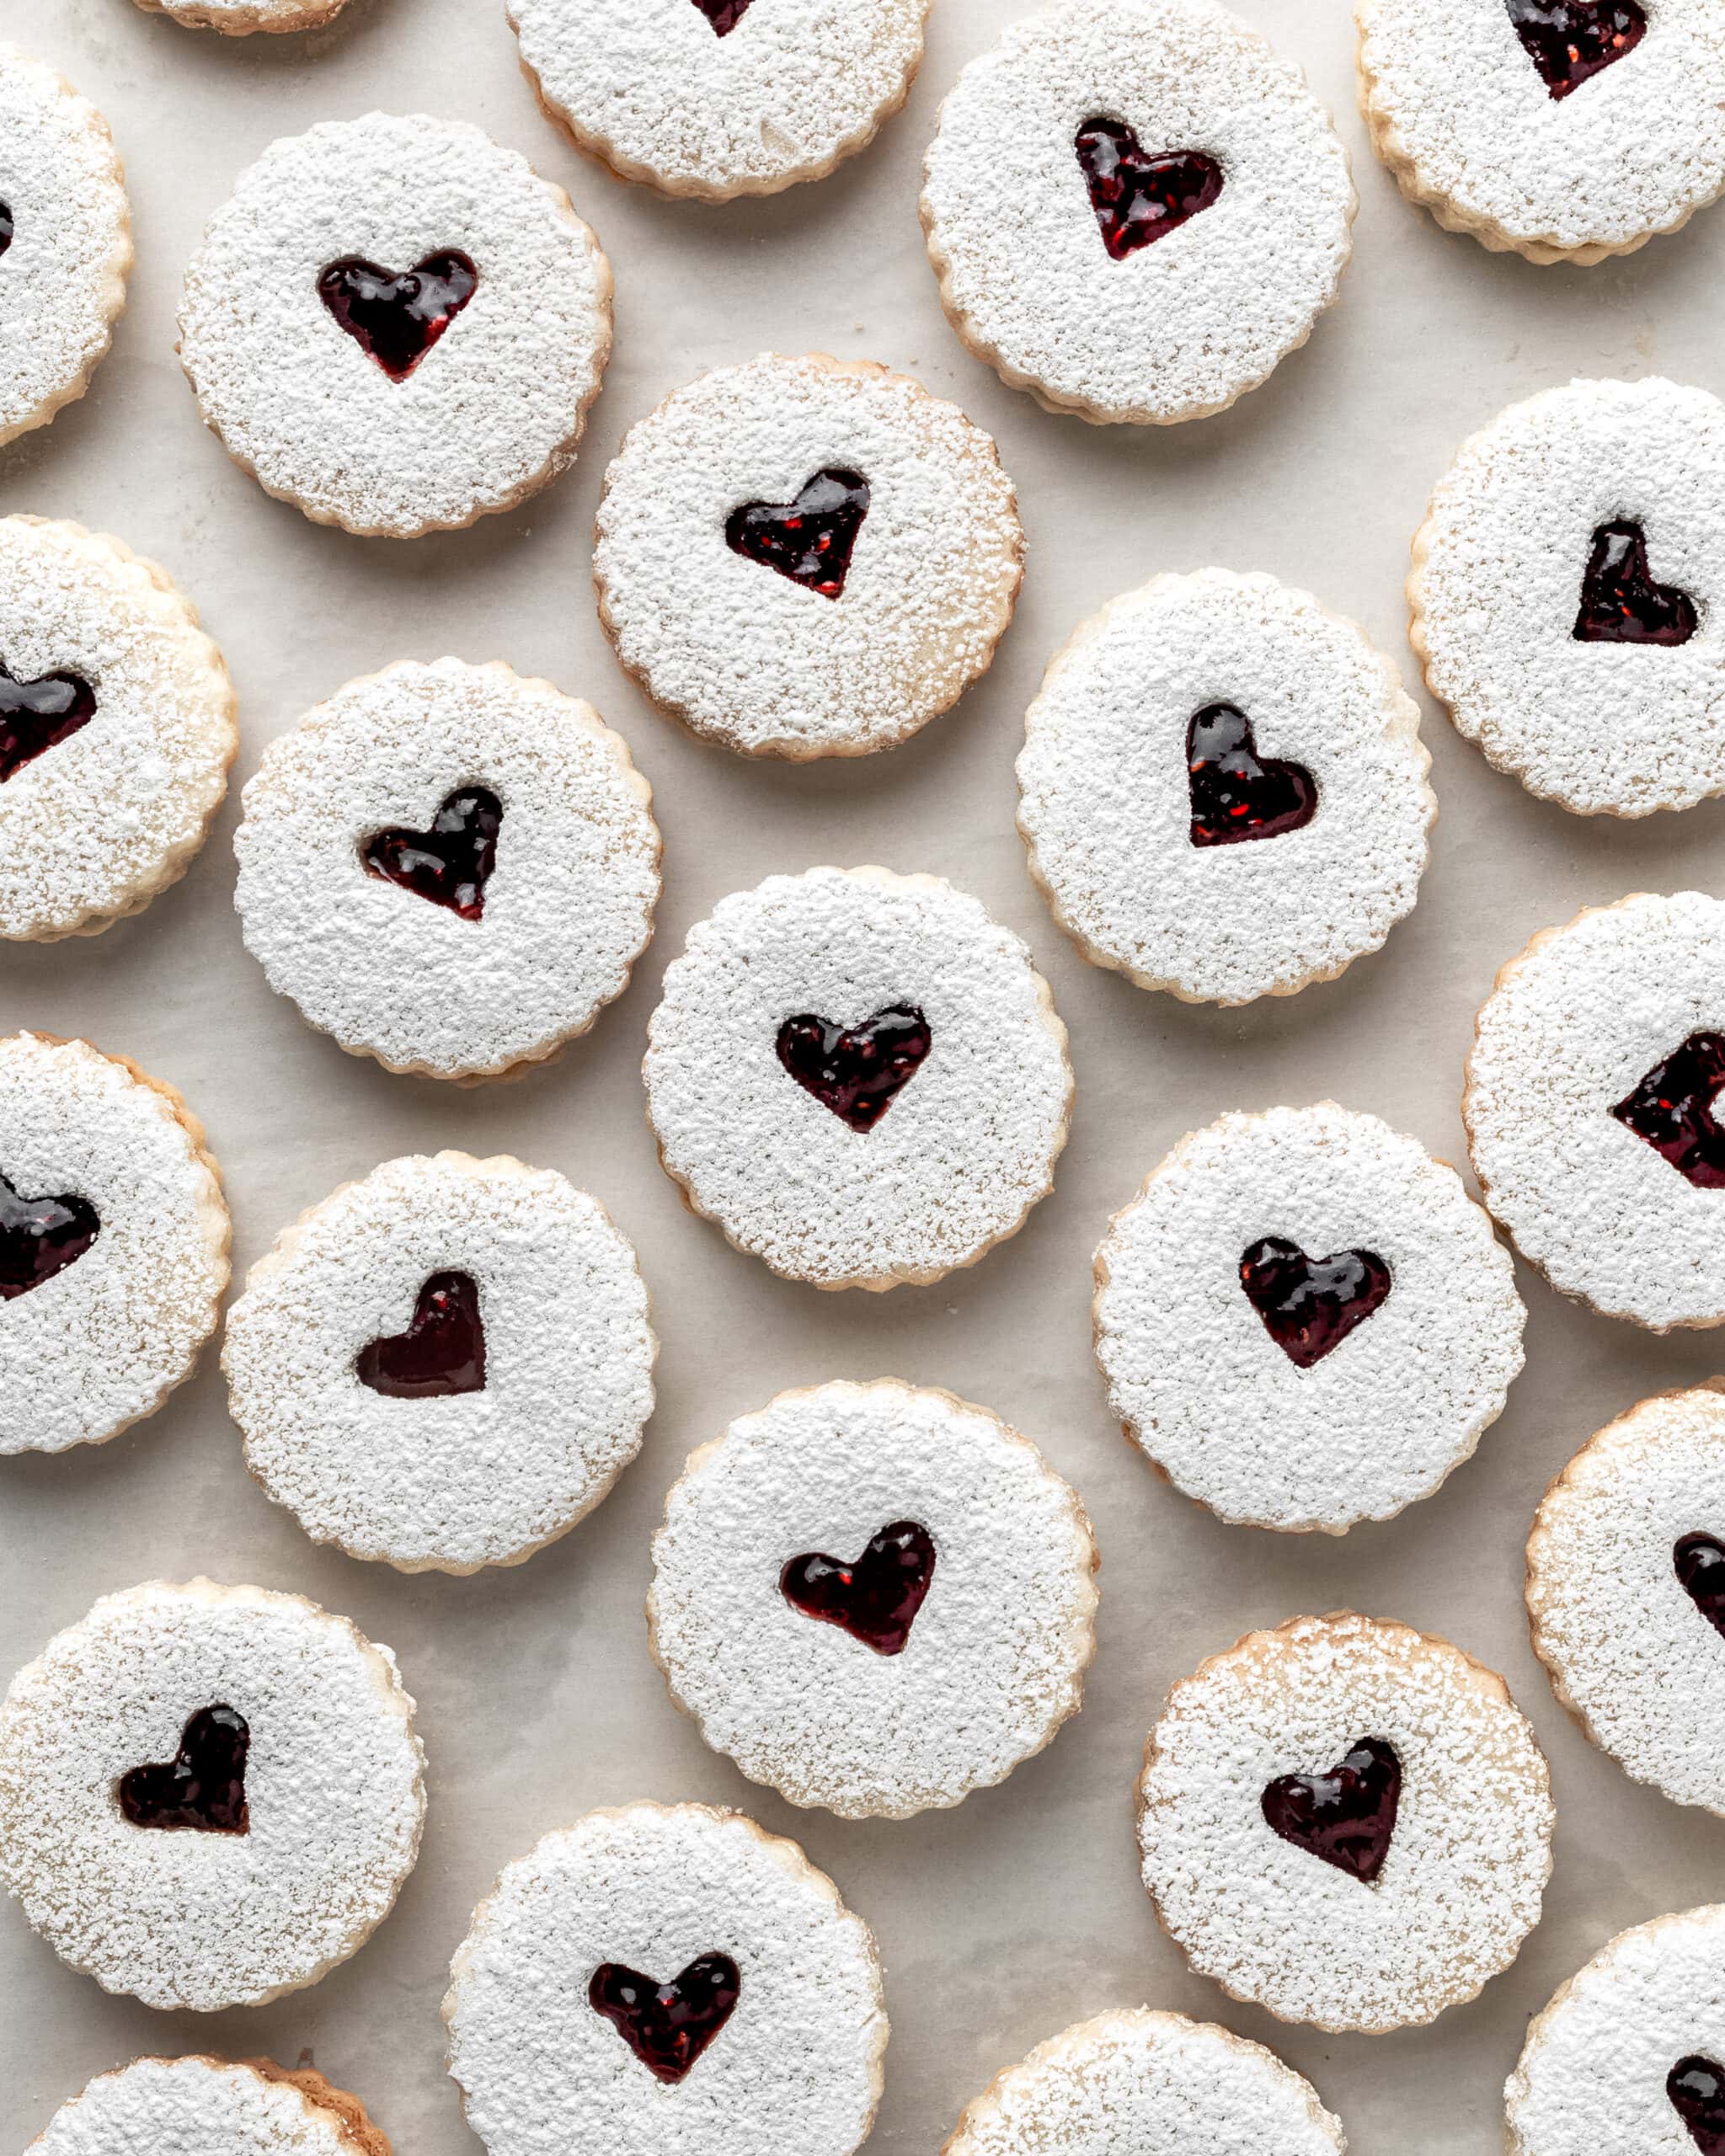 Gluten-free raspberry linzer cookies. Jam filled cookie with a heart in the middle exposing the red jam color, and powdered sugar on top.